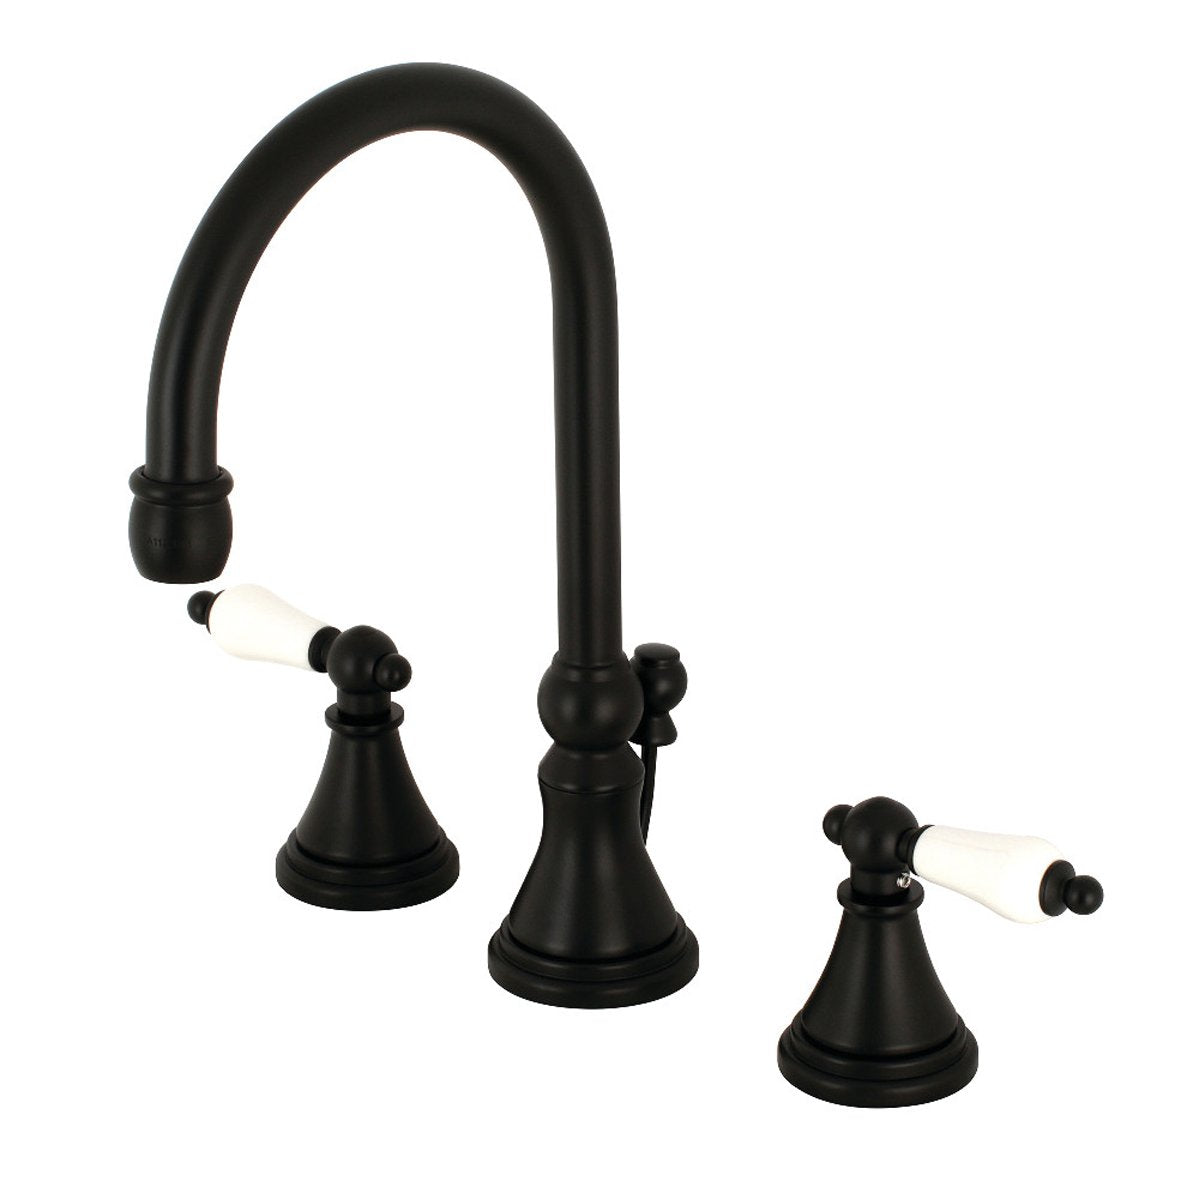 Kingston Brass Governor Deck Mount 8-Inch Widespread Bathroom Faucet